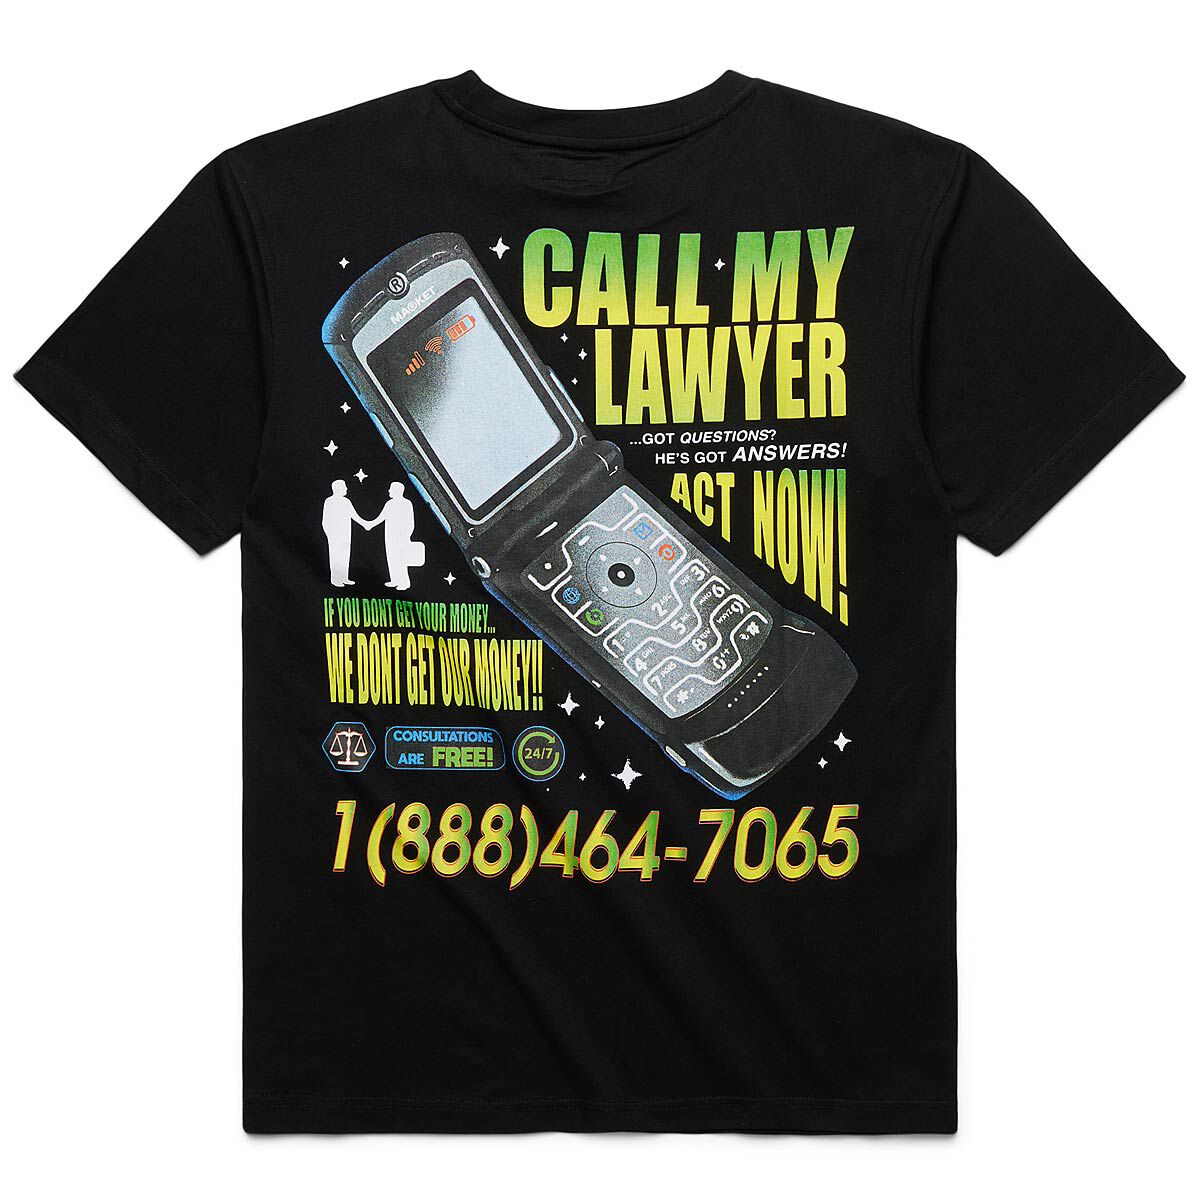 Chinatown Market Call My Lawyer Act Now Tee